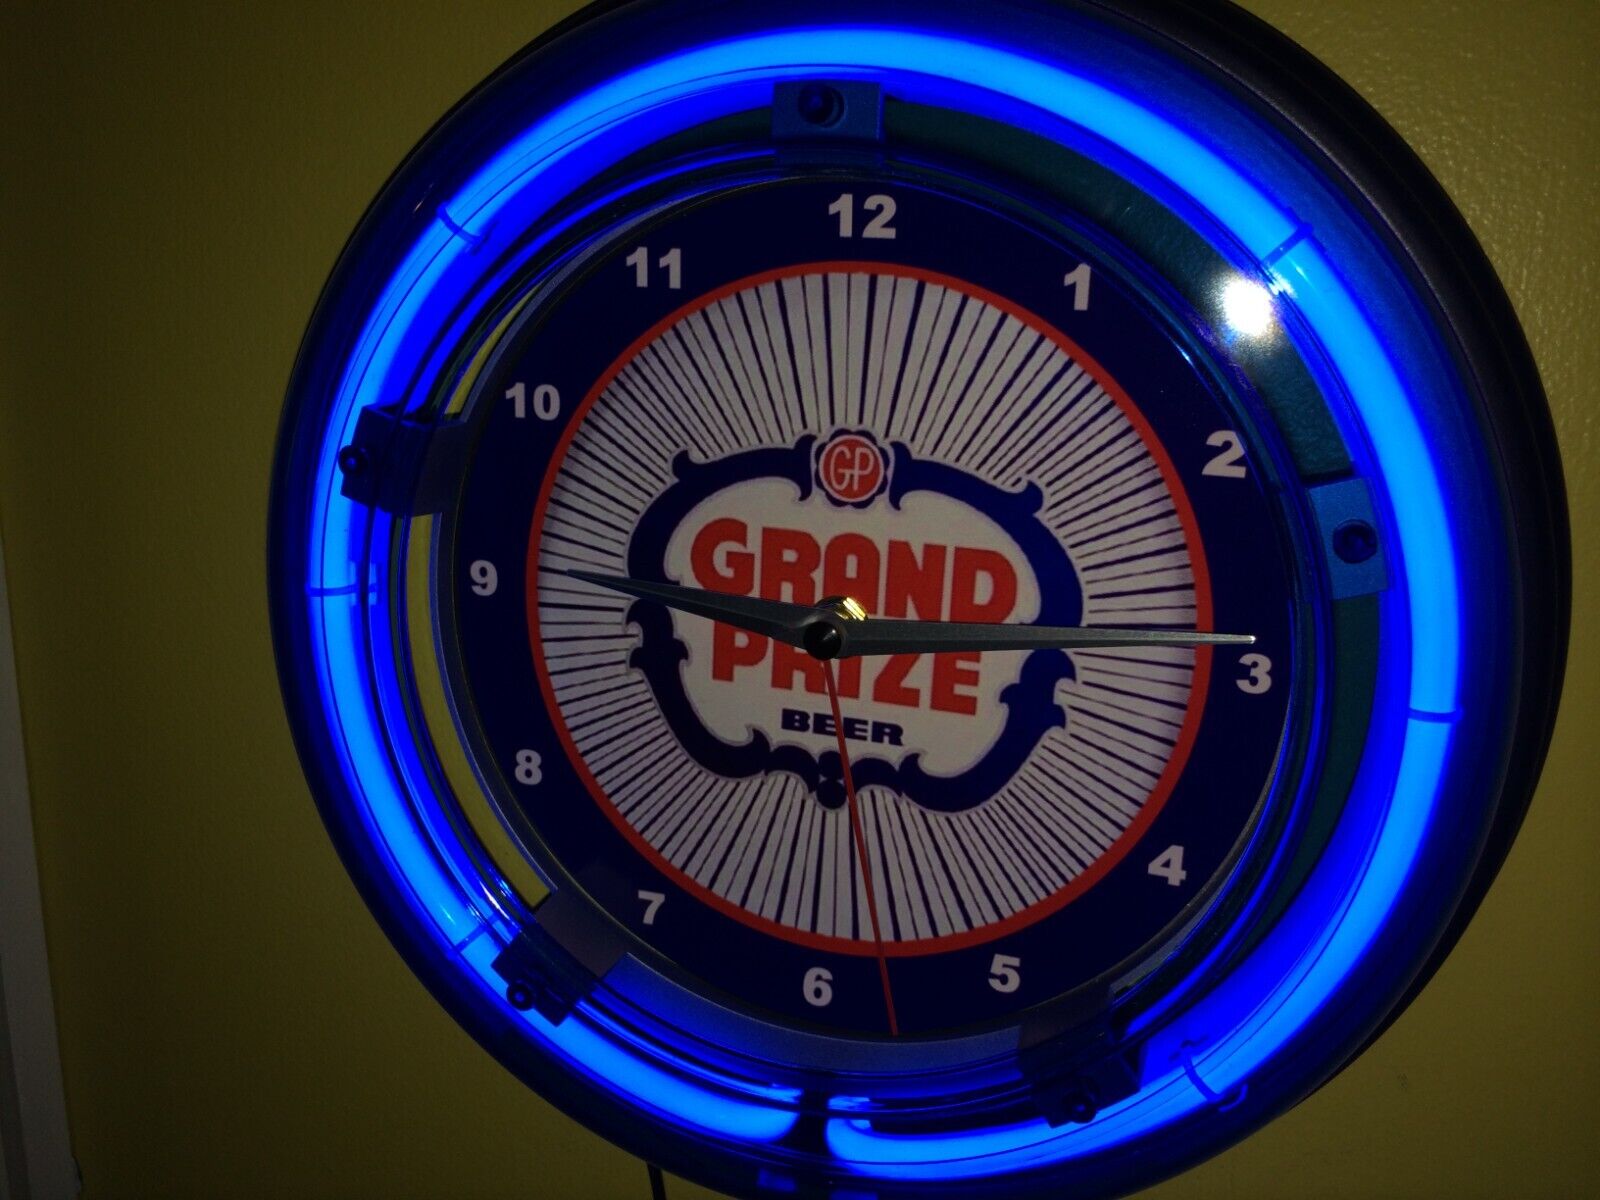 Grand Prize Beer Bar Man Cave Neon Wall Clock Advertising Sign